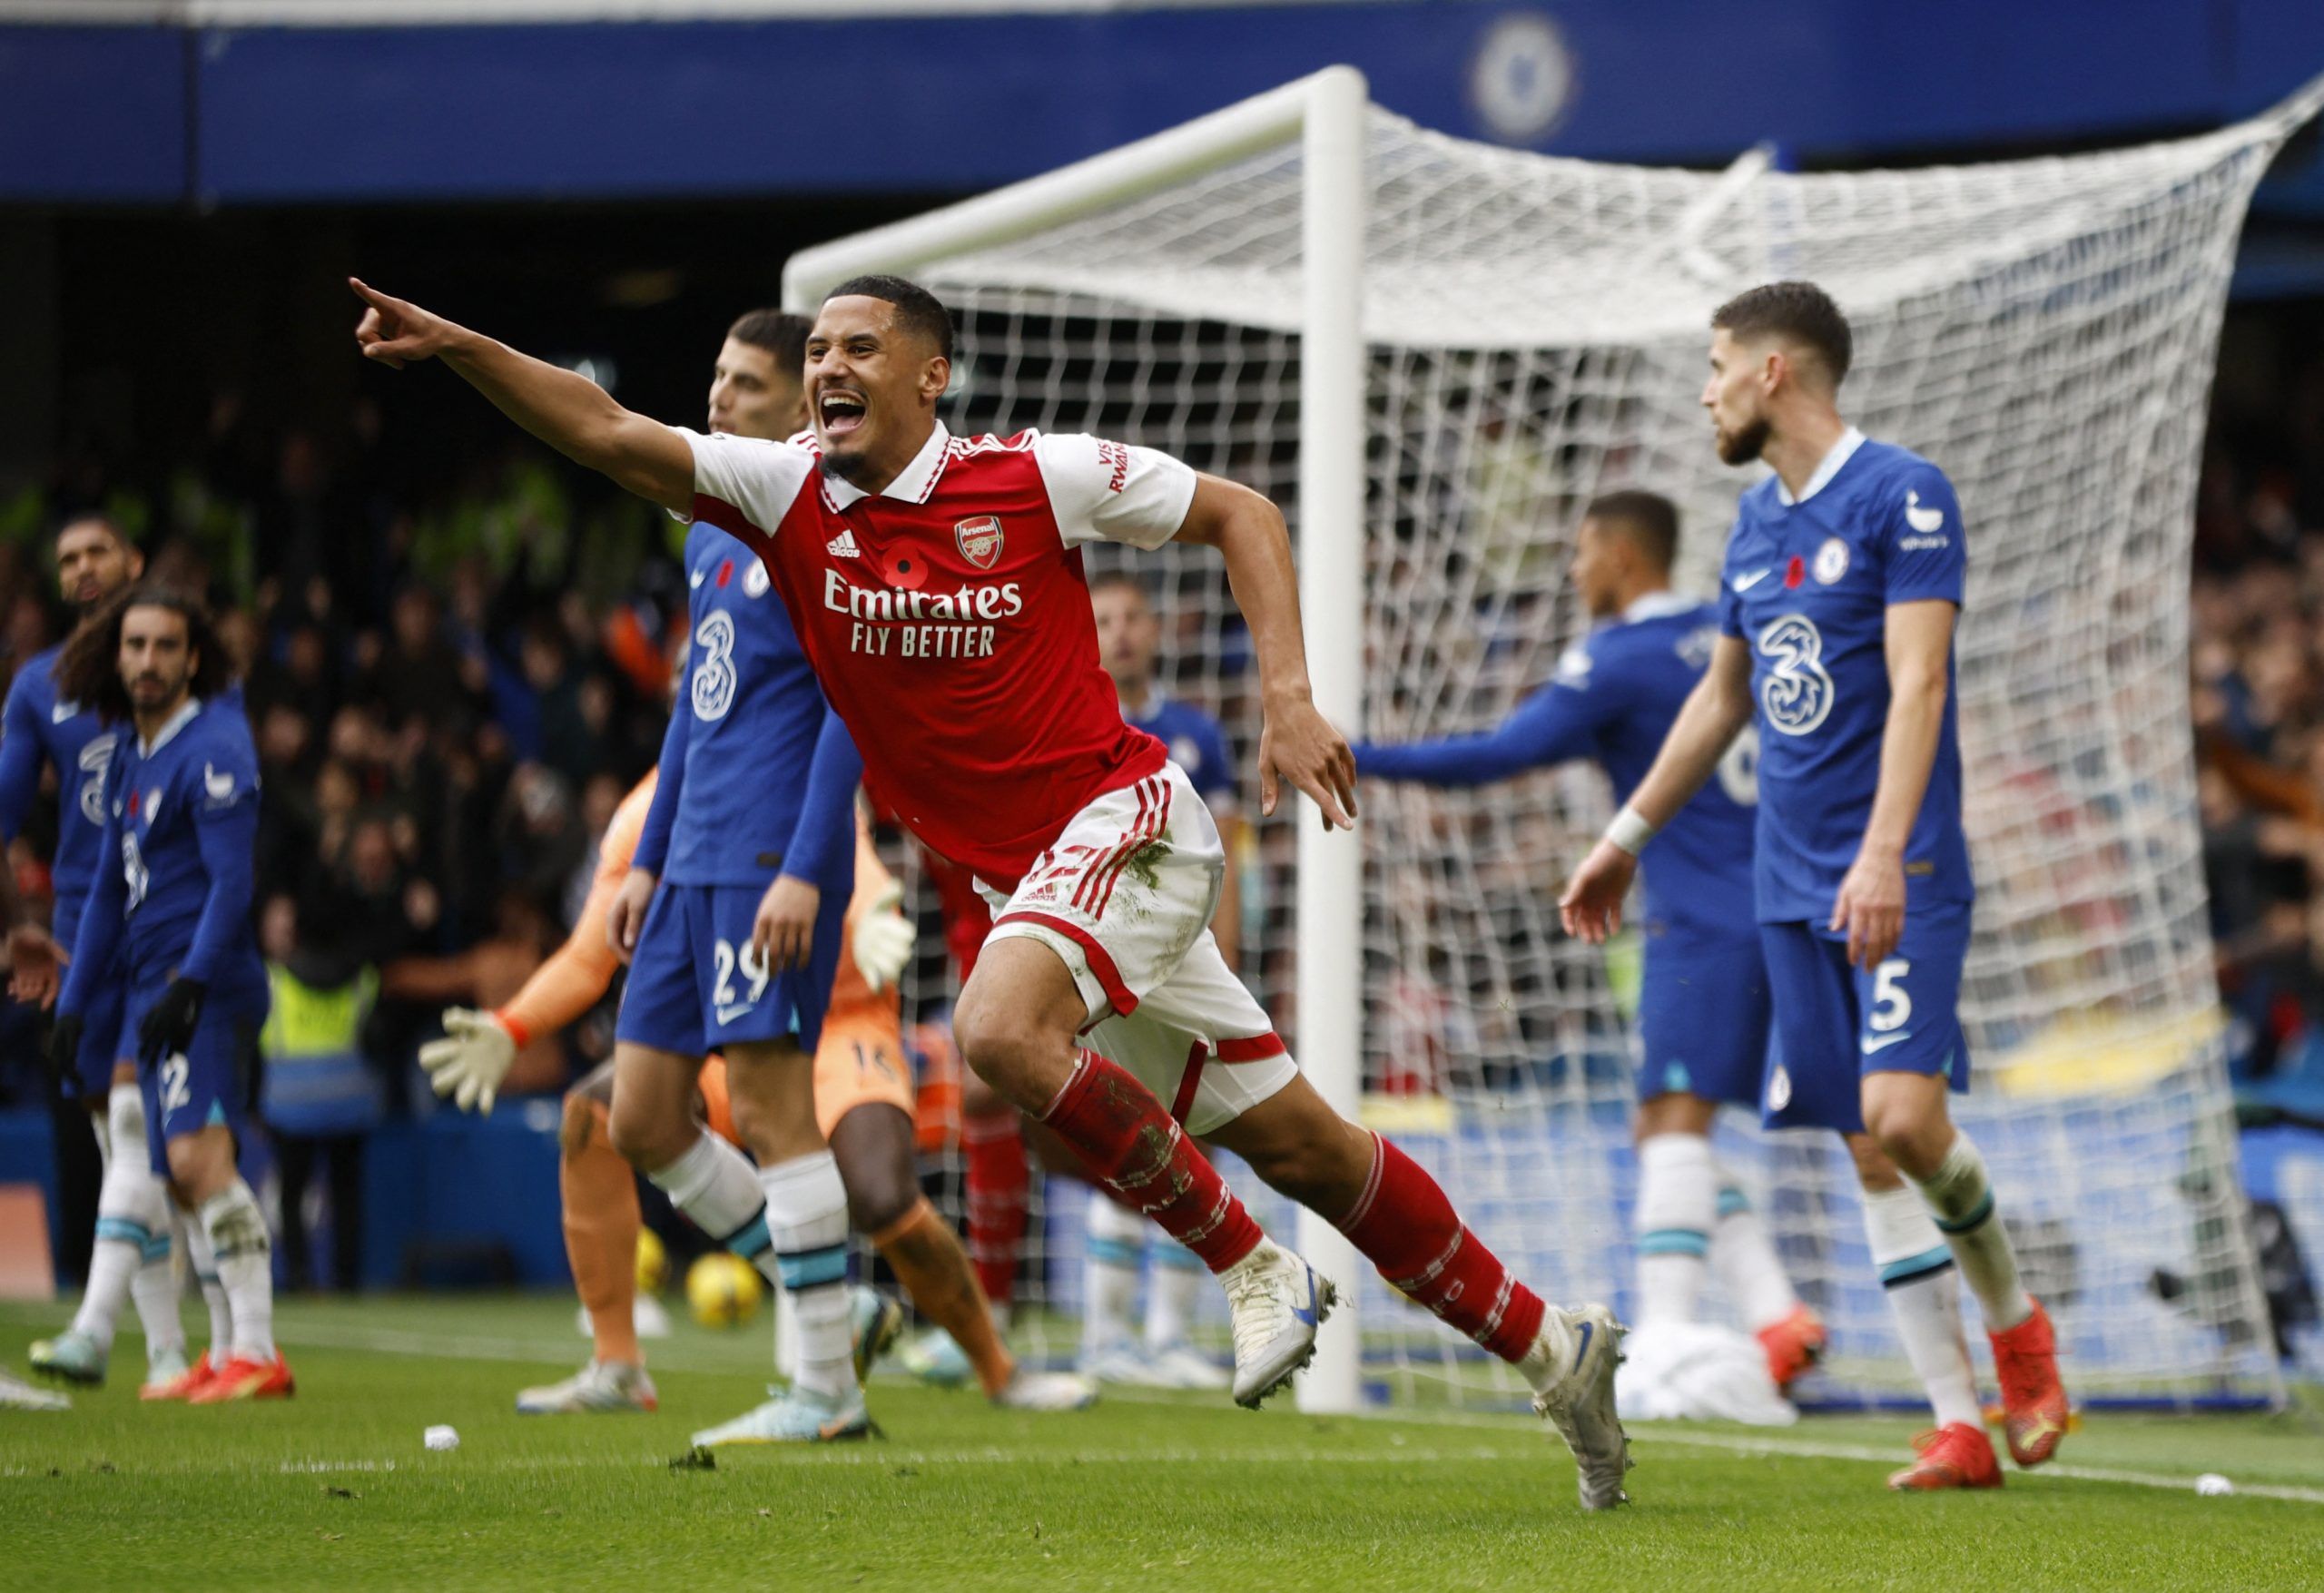 Soccer Football - Premier League - Chelsea v Arsenal - Stamford Bridge, London, Britain - November 6, 2022 Arsenal's William Saliba celebrates their first goal scored by Gabriel Action Images via Reuters/John Sibley EDITORIAL USE ONLY. No use with unauthorized audio, video, data, fixture lists, club/league logos or 'live' services. Online in-match use limited to 75 images, no video emulation. No use in betting, games or single club /league/player publications.  Please contact your account repres